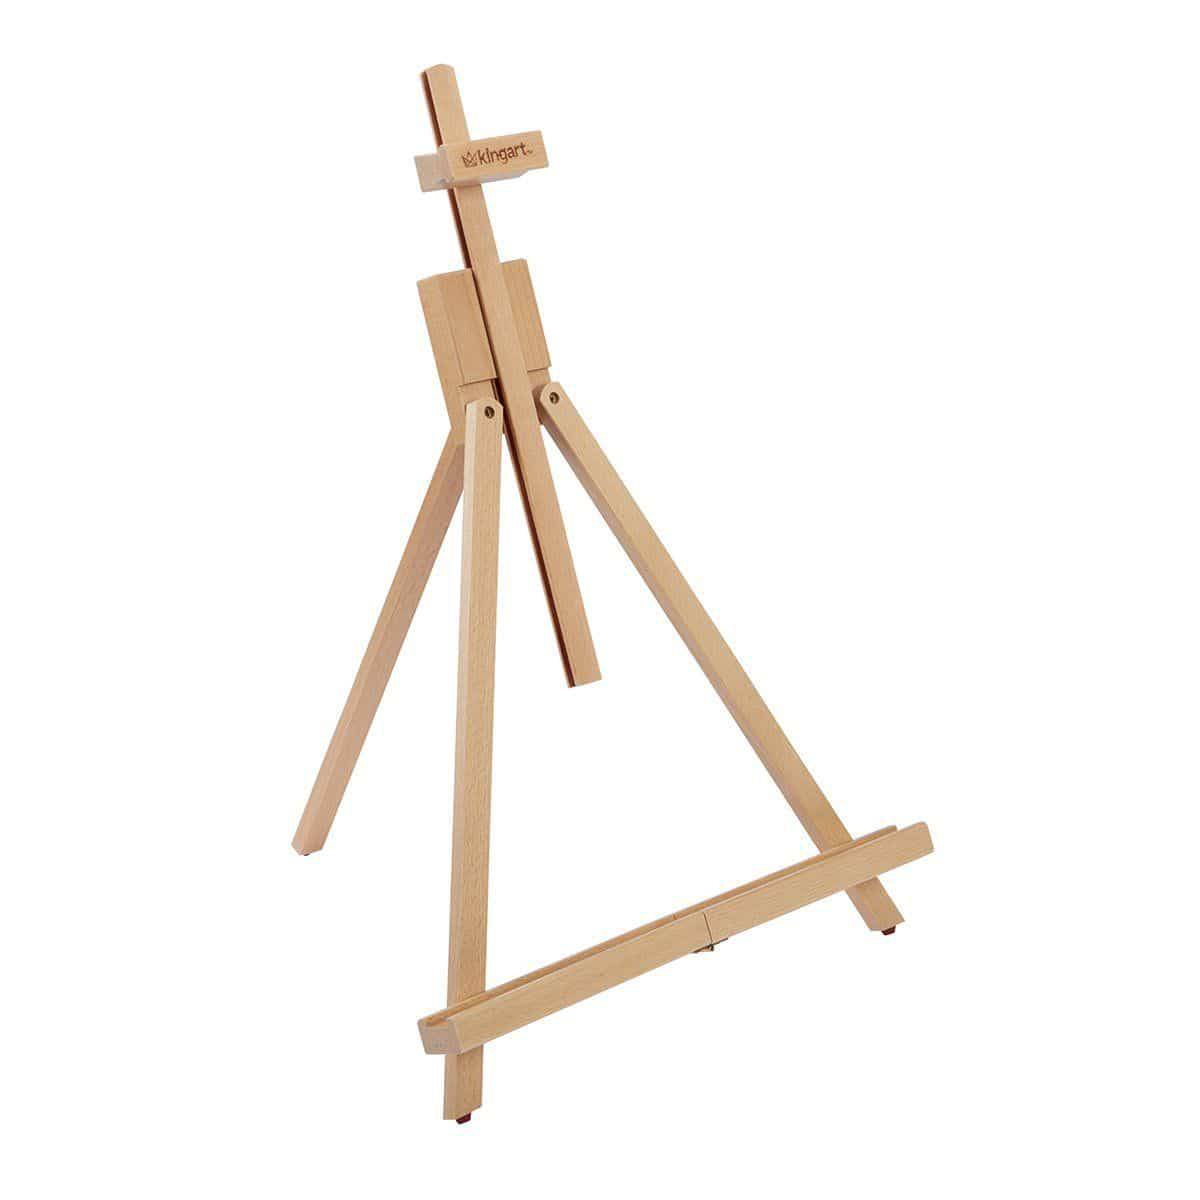 OverPatio Art Easel Wood Tripod A-Frame Easel Stand Floor Display